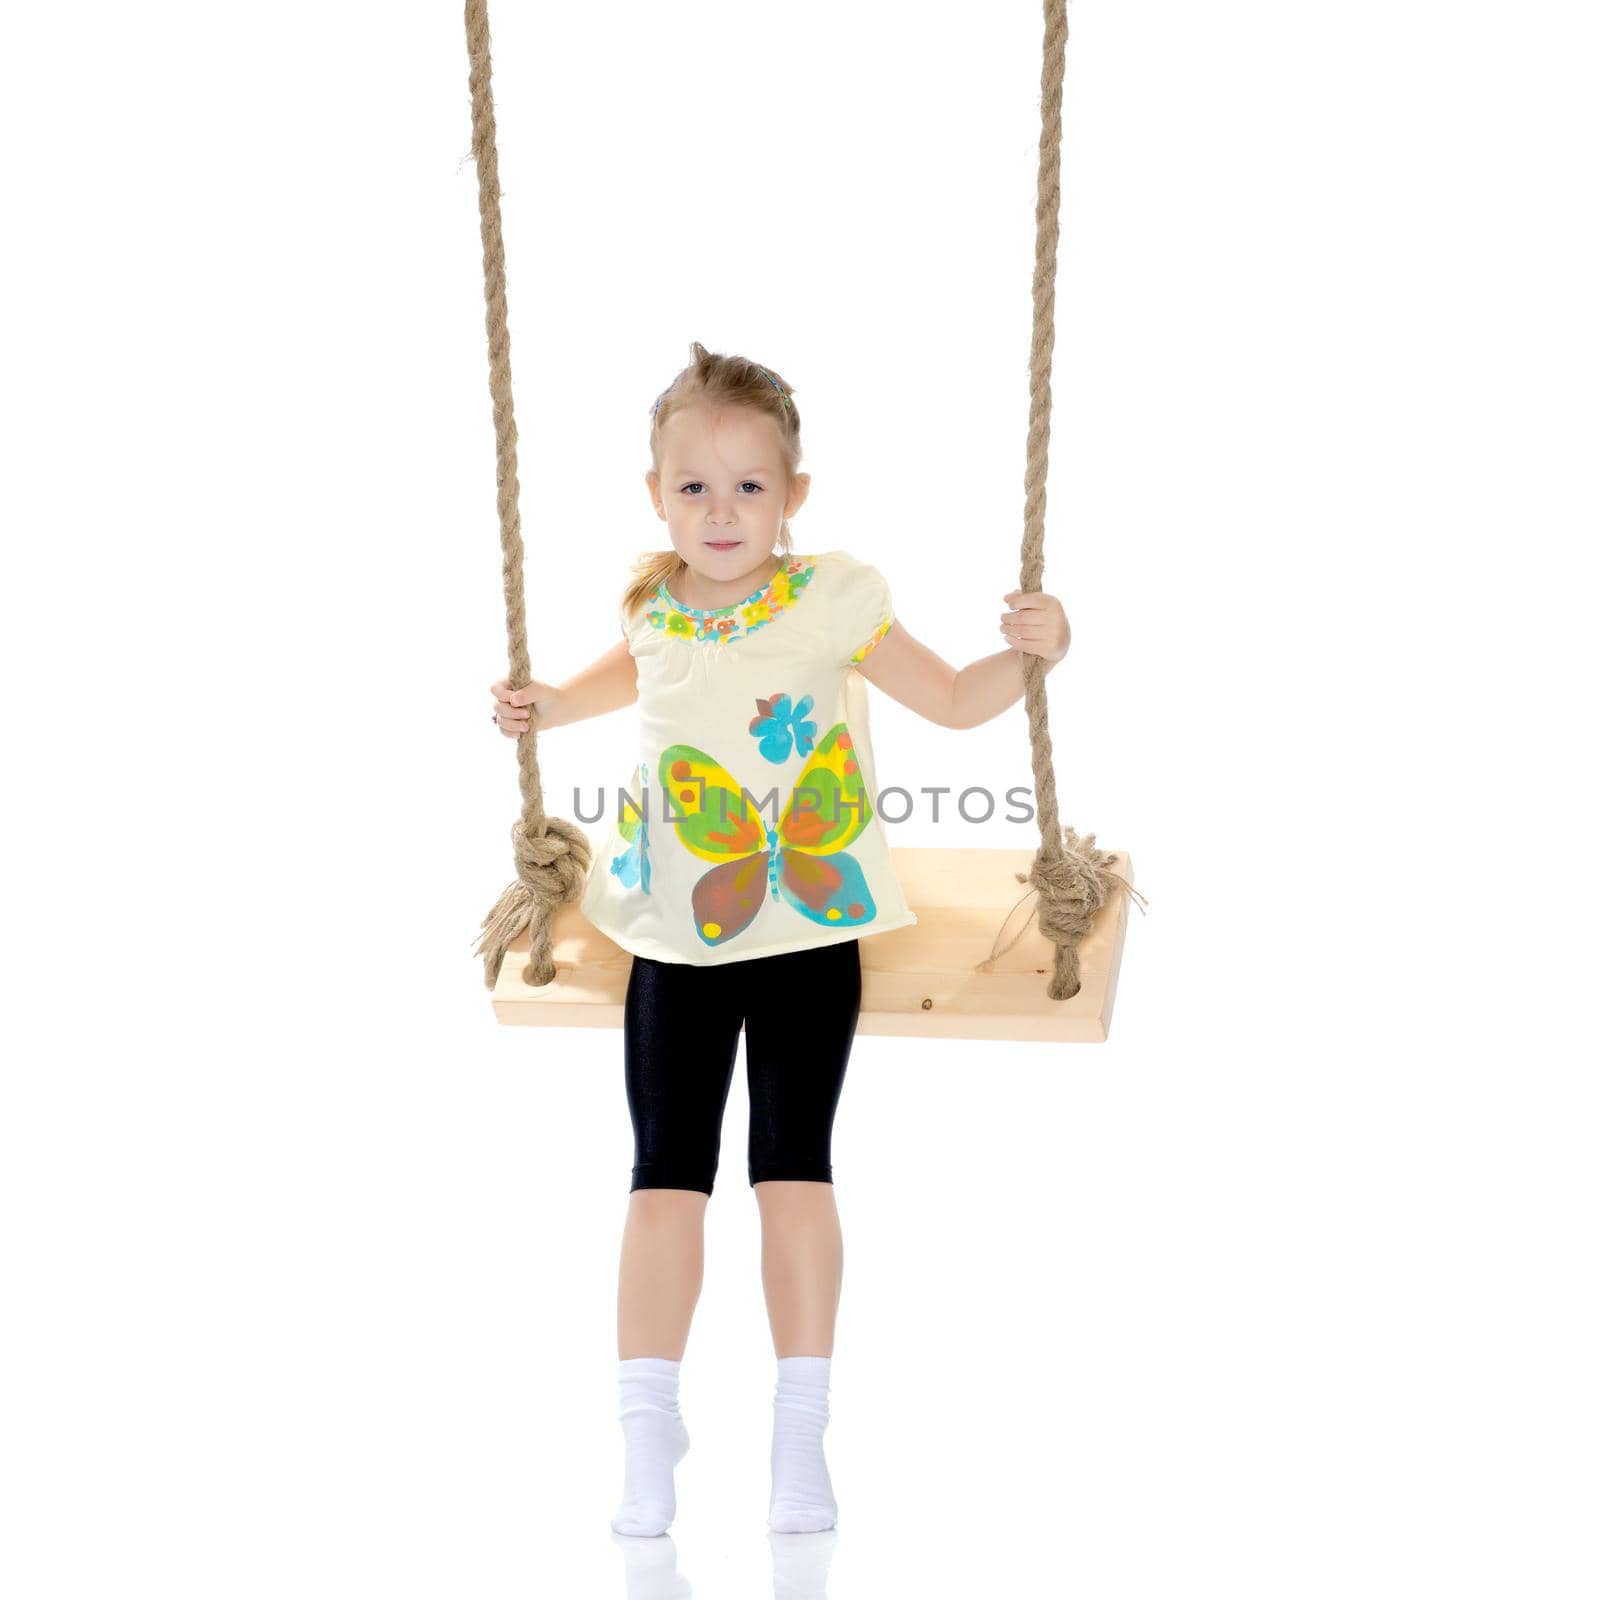 Adorable little girl swinging on a swing. She is happy to have fun and show how she can do it. The concept of summer recreation and harmonious development of the child. Isolated on white